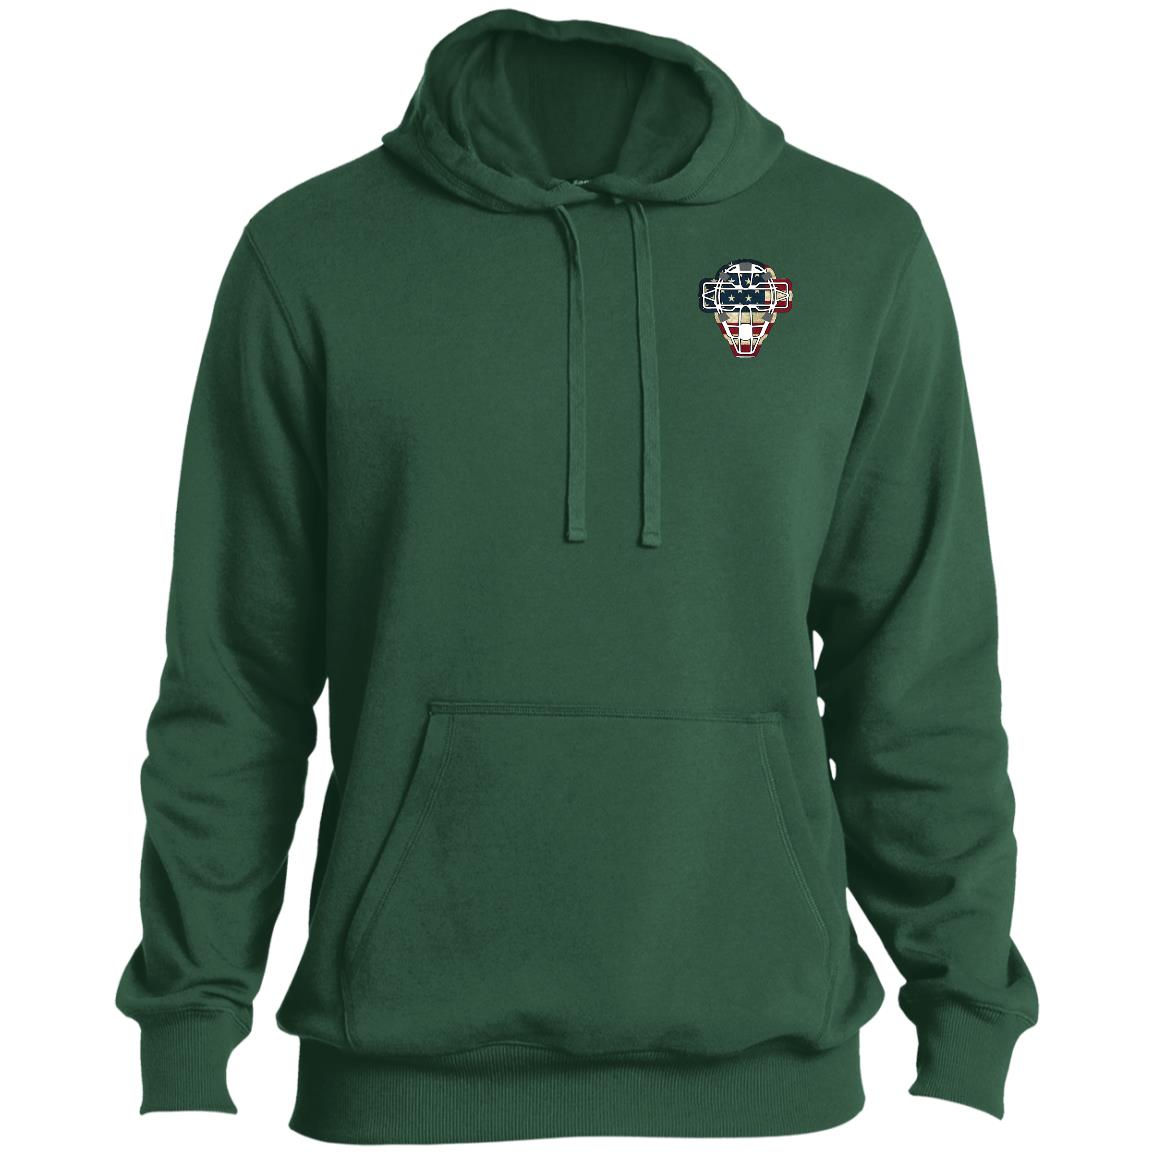 The-Catching-Guy-long-sleeve-sweater-Face-Mask-American-Flag-green-logo